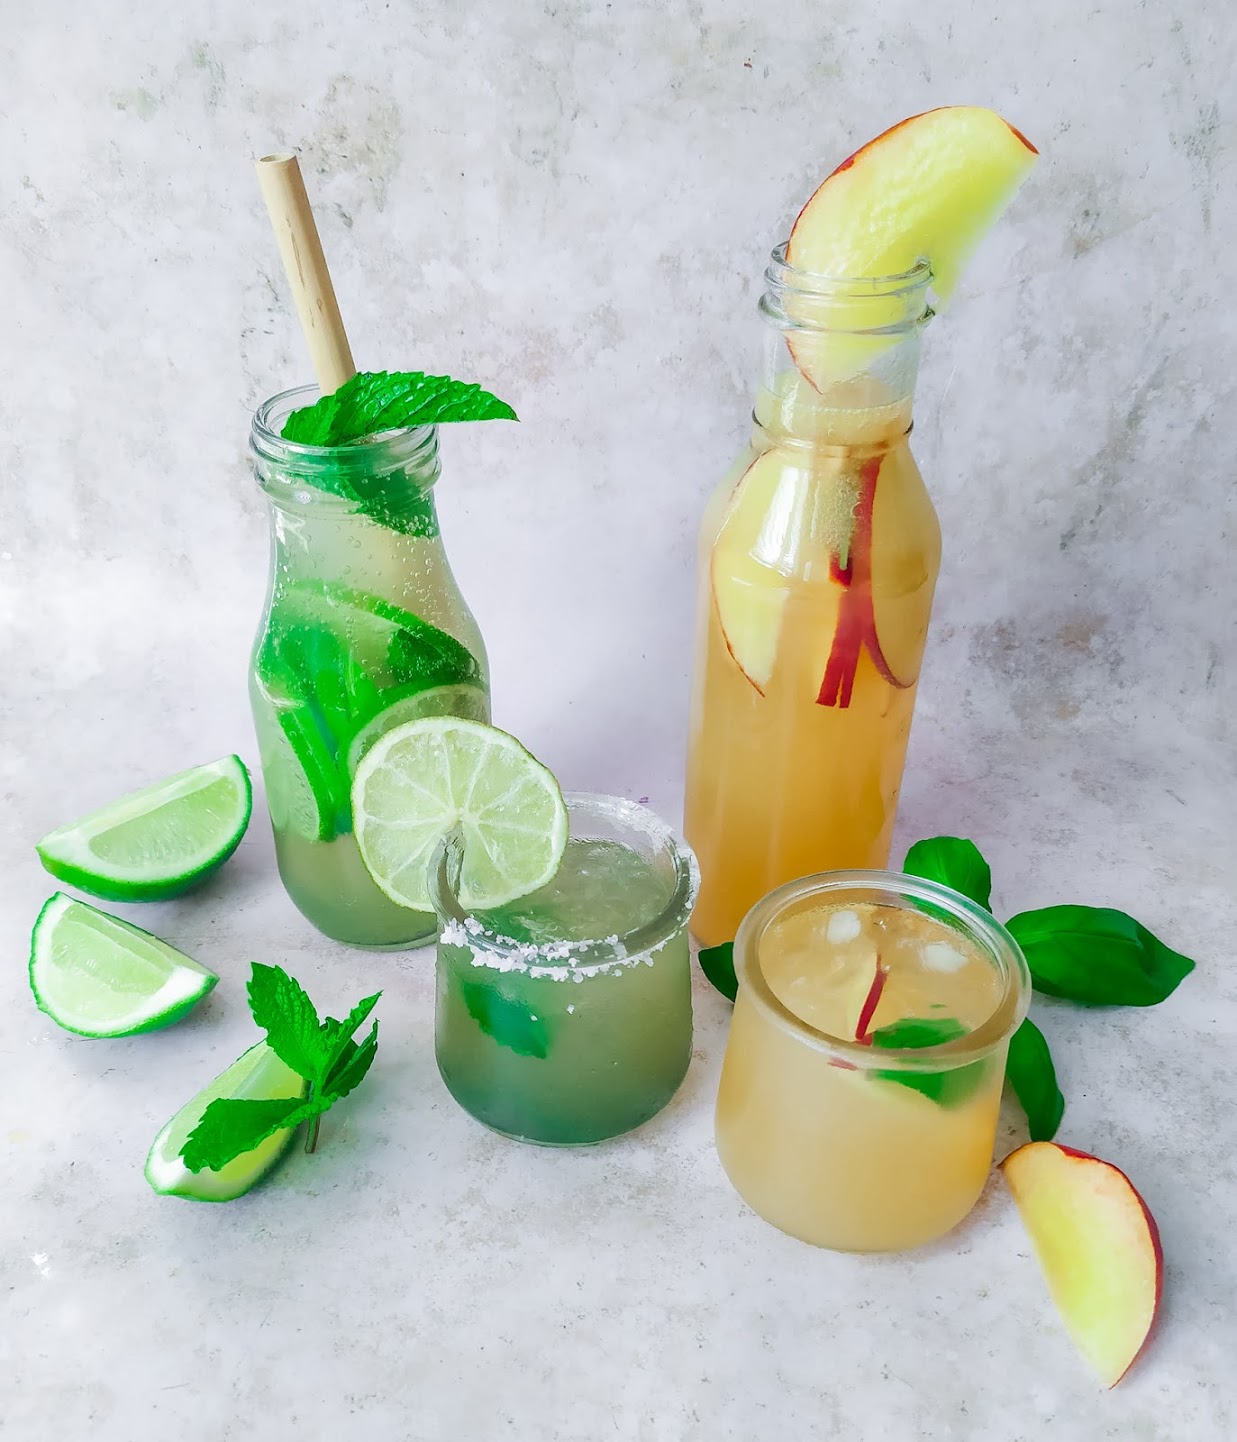 fruity mocktails made from limes and peaches on a white background